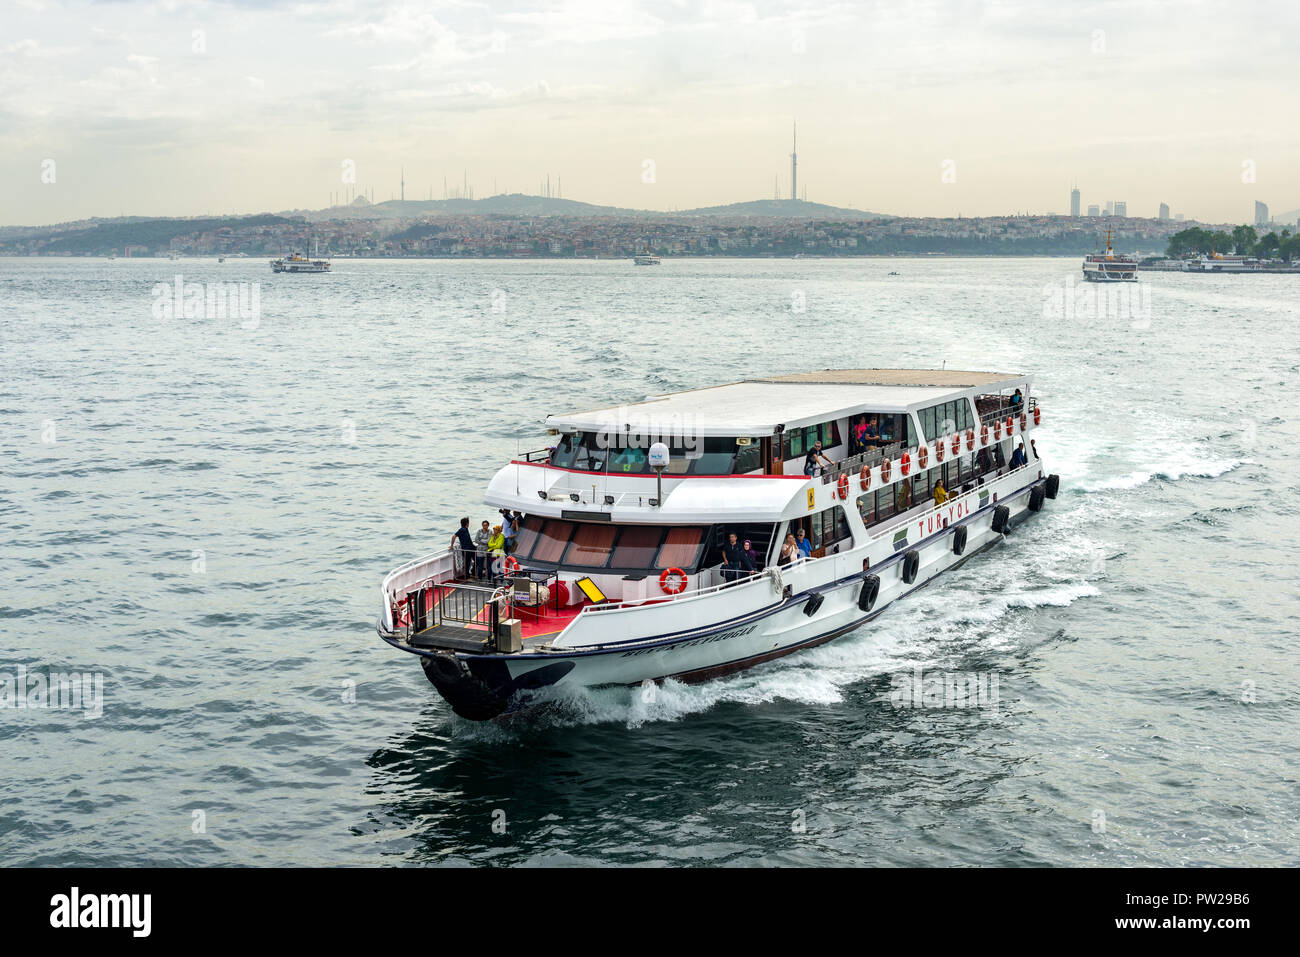 A Turyol passenger ferry sails on the Bosphorus with passengers aboard, Istanbul, Turkey Stock Photo